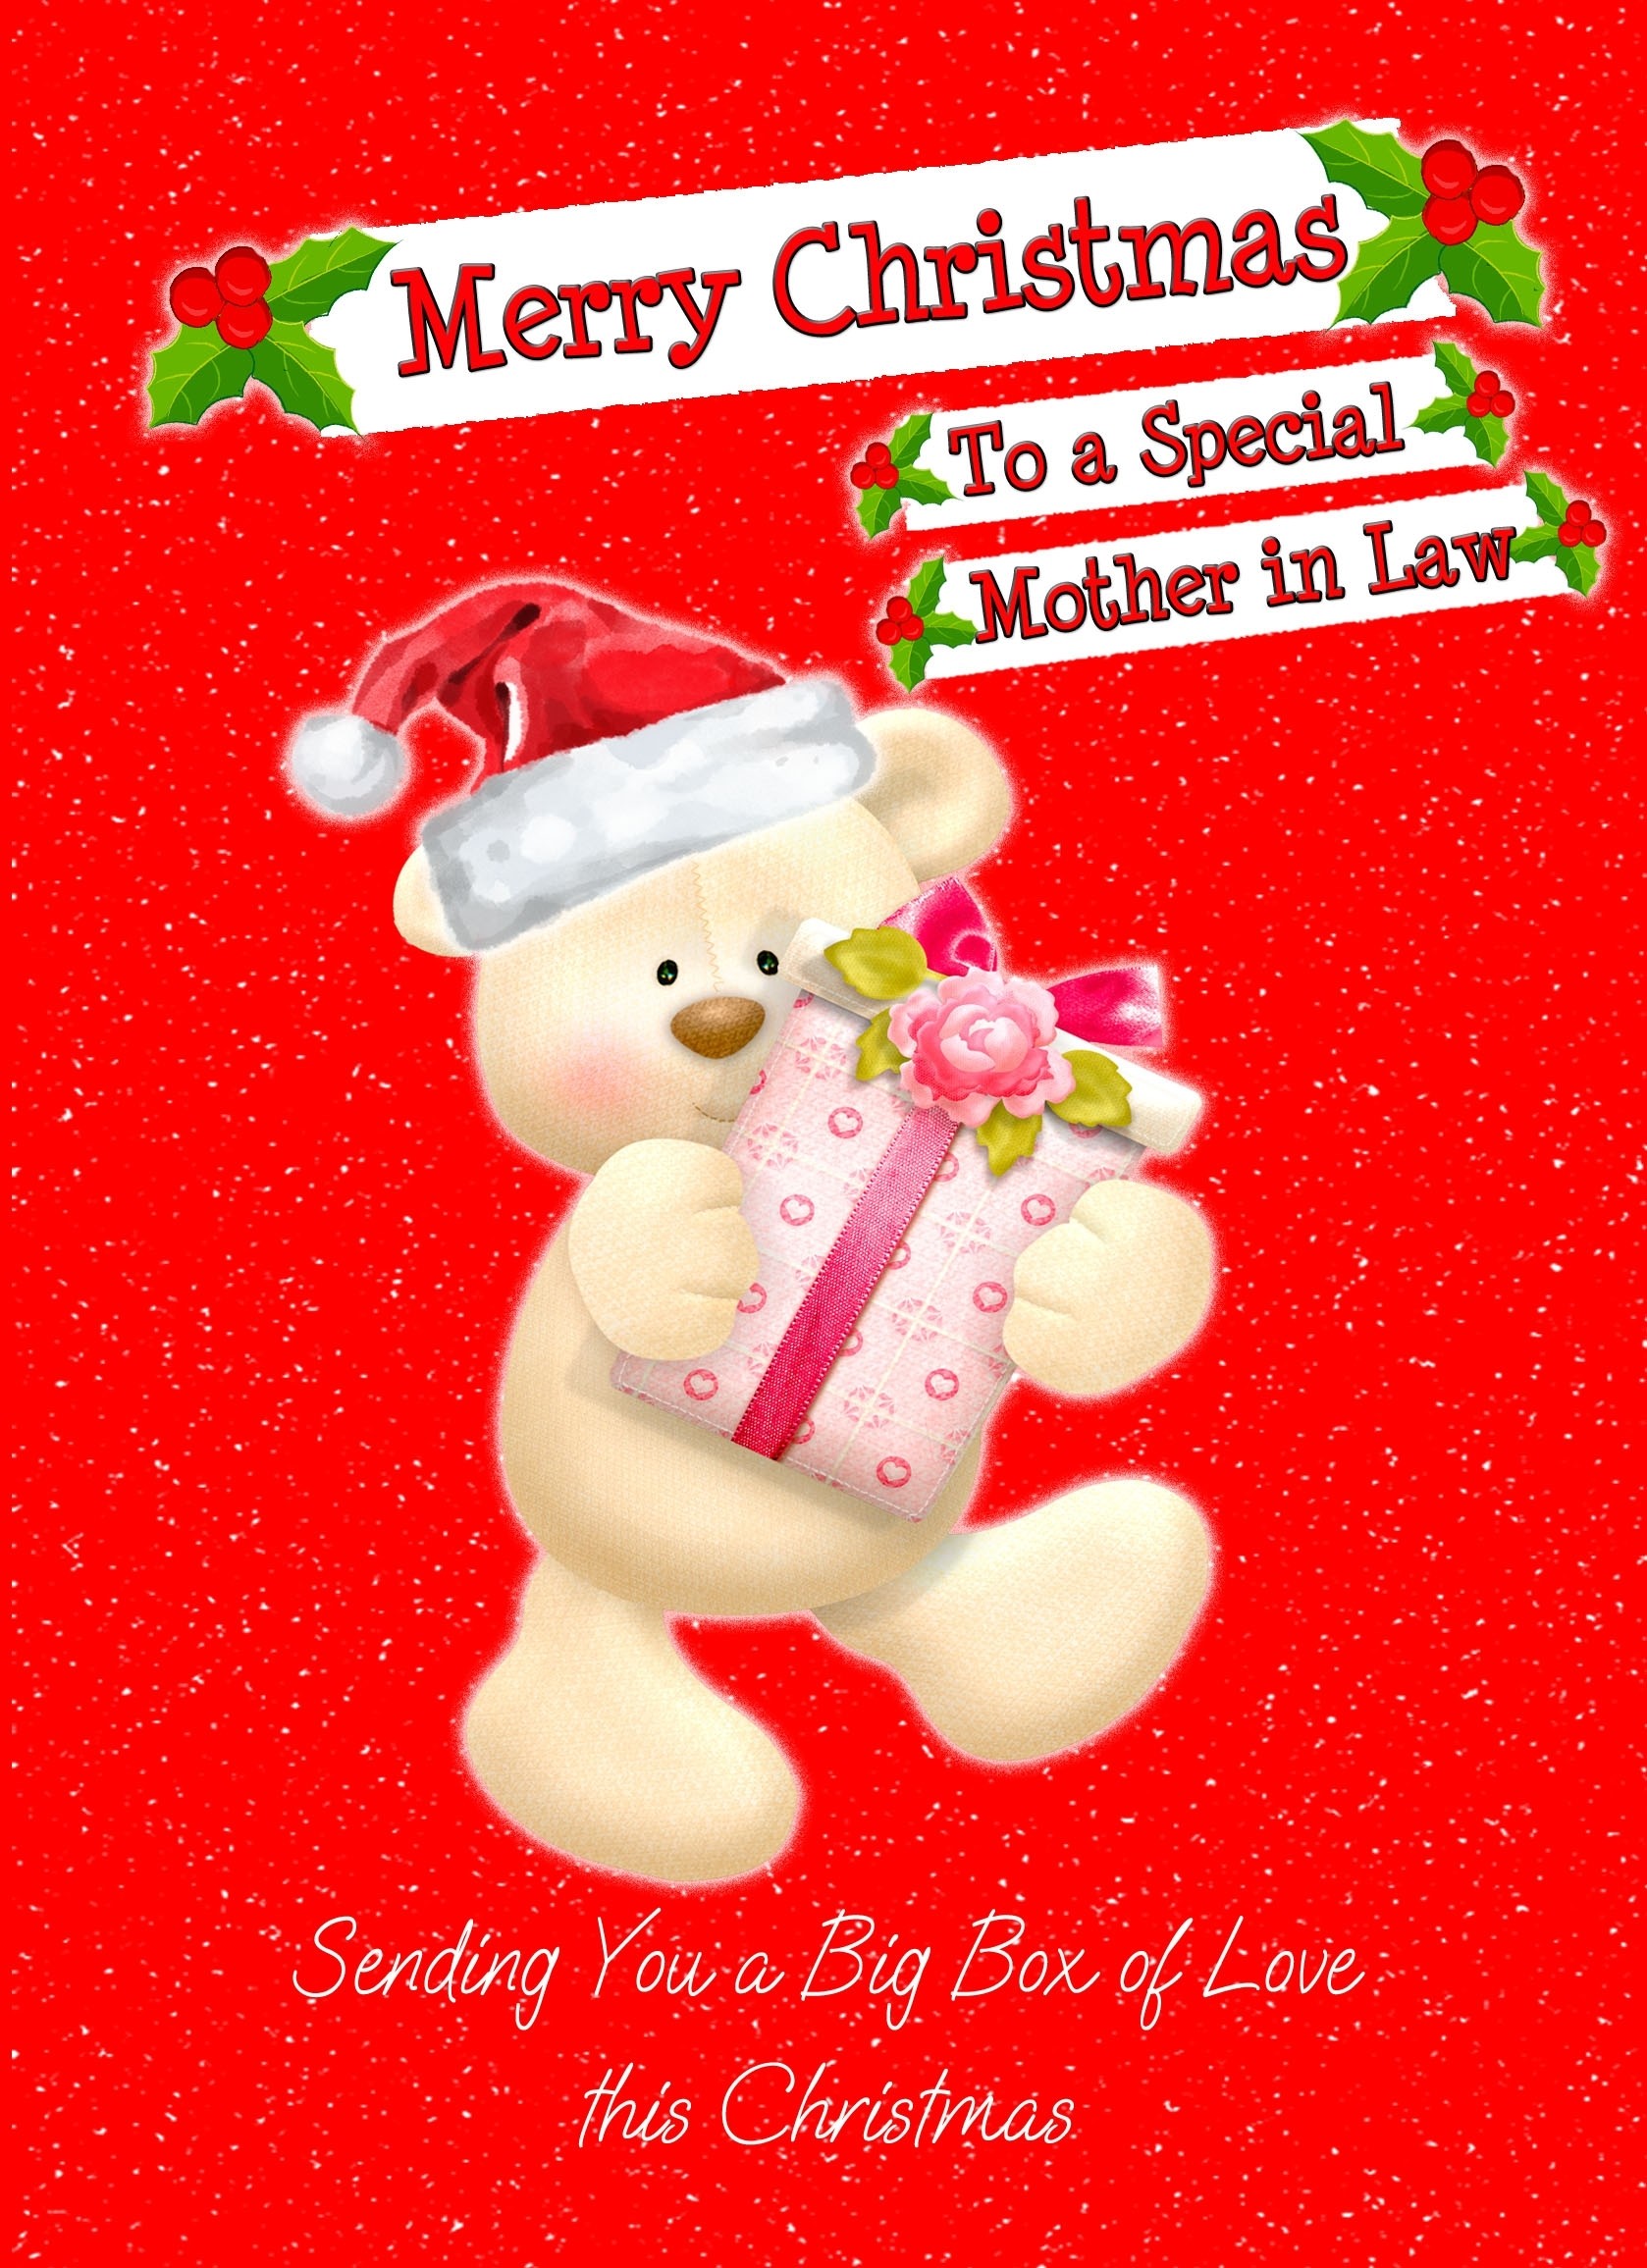 Christmas Card For Mother in Law (Red Bear)